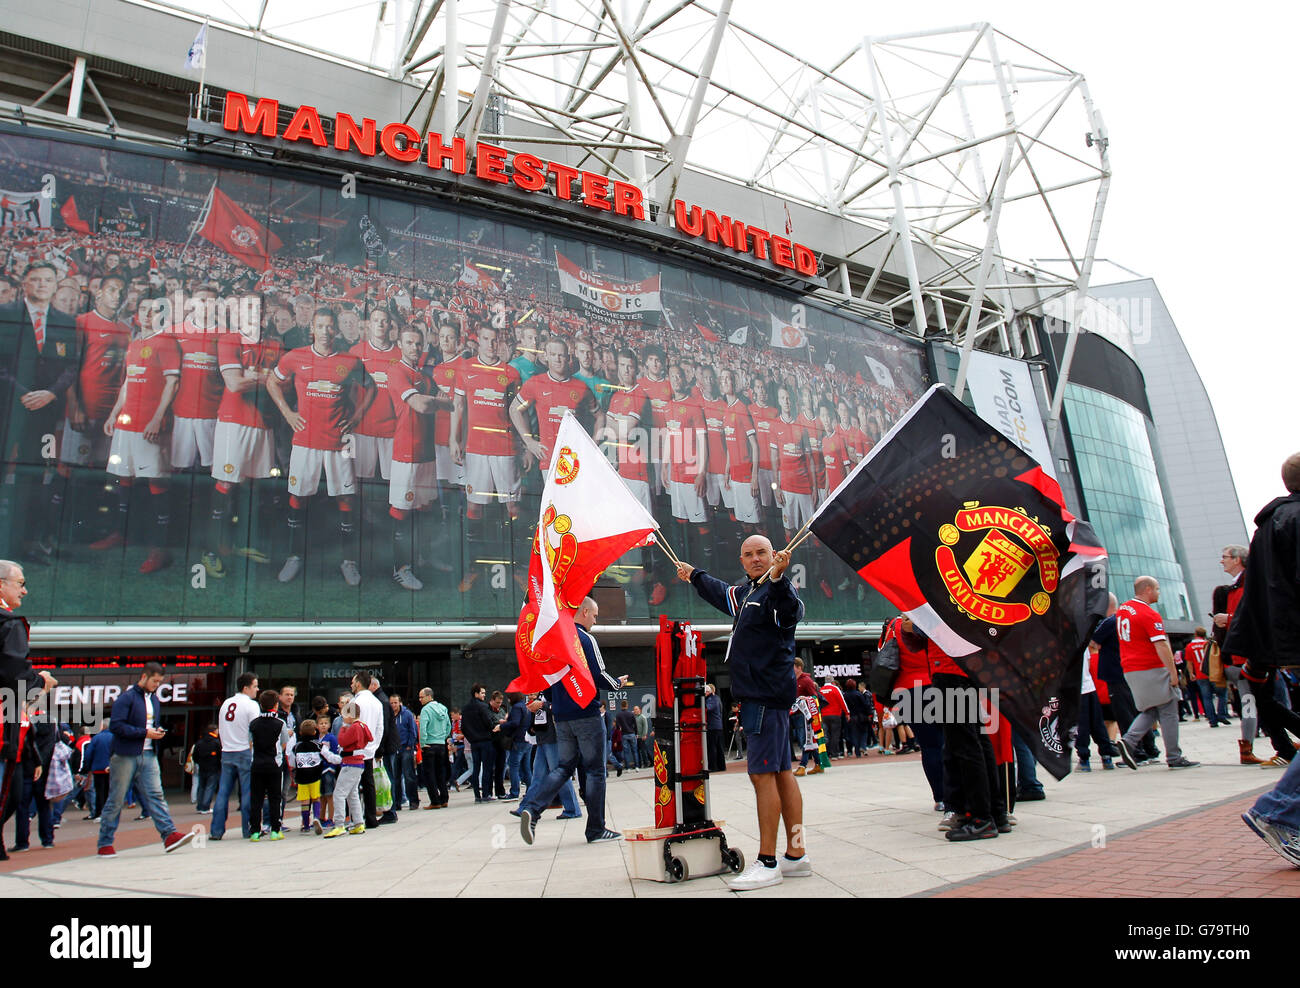 Soccer - Barclays Premier League - Manchester United v Swansea City - Old Trafford. Flag Seller outside Old Trafford Stock Photo